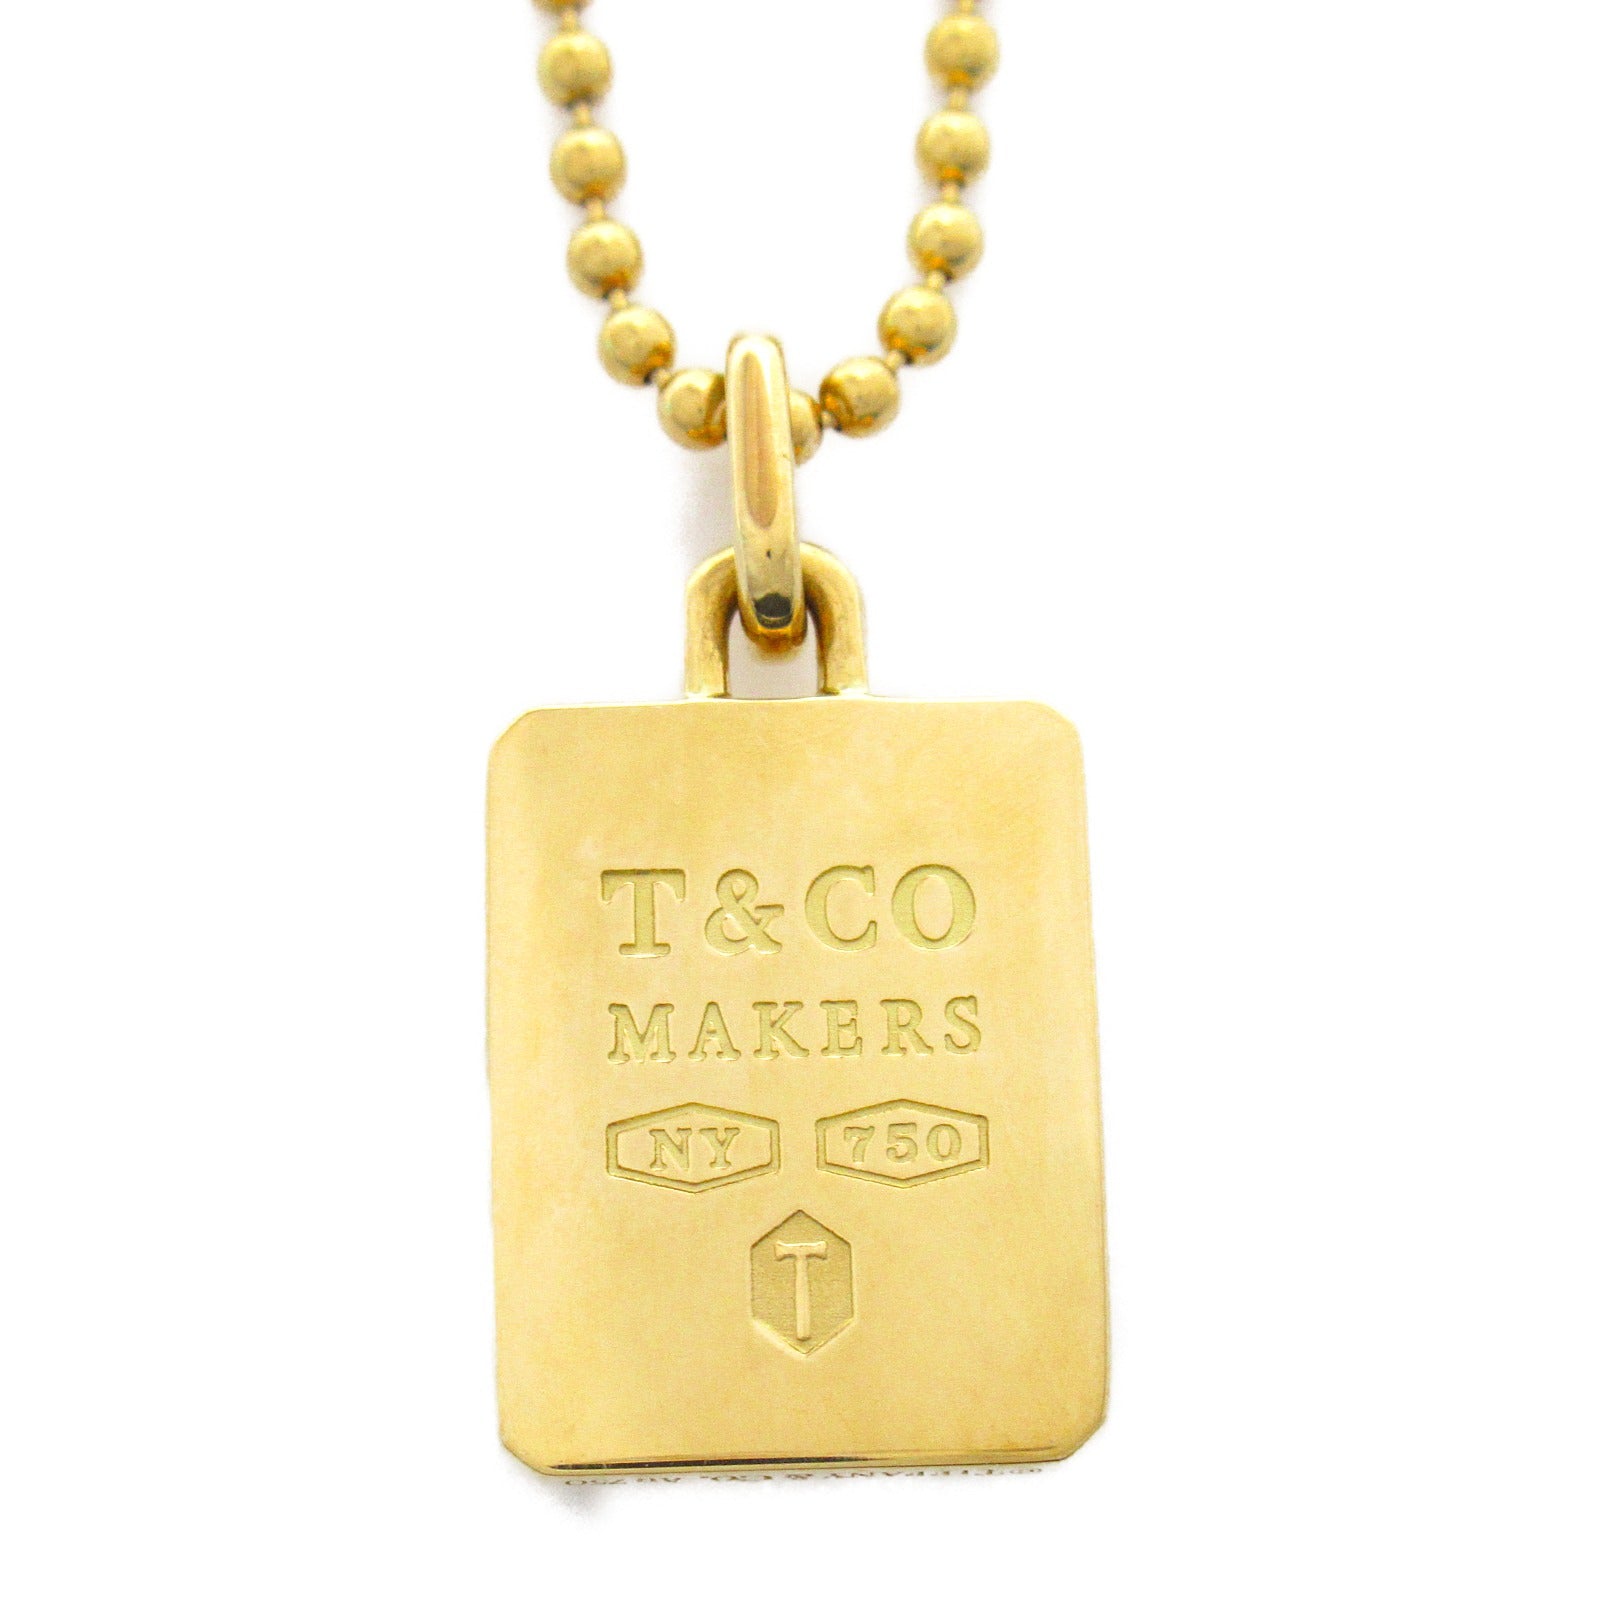 Tiffany TIFFANY&CO manufacturers square necklace necklace jewelry K18 (yellow g) men ladies gold